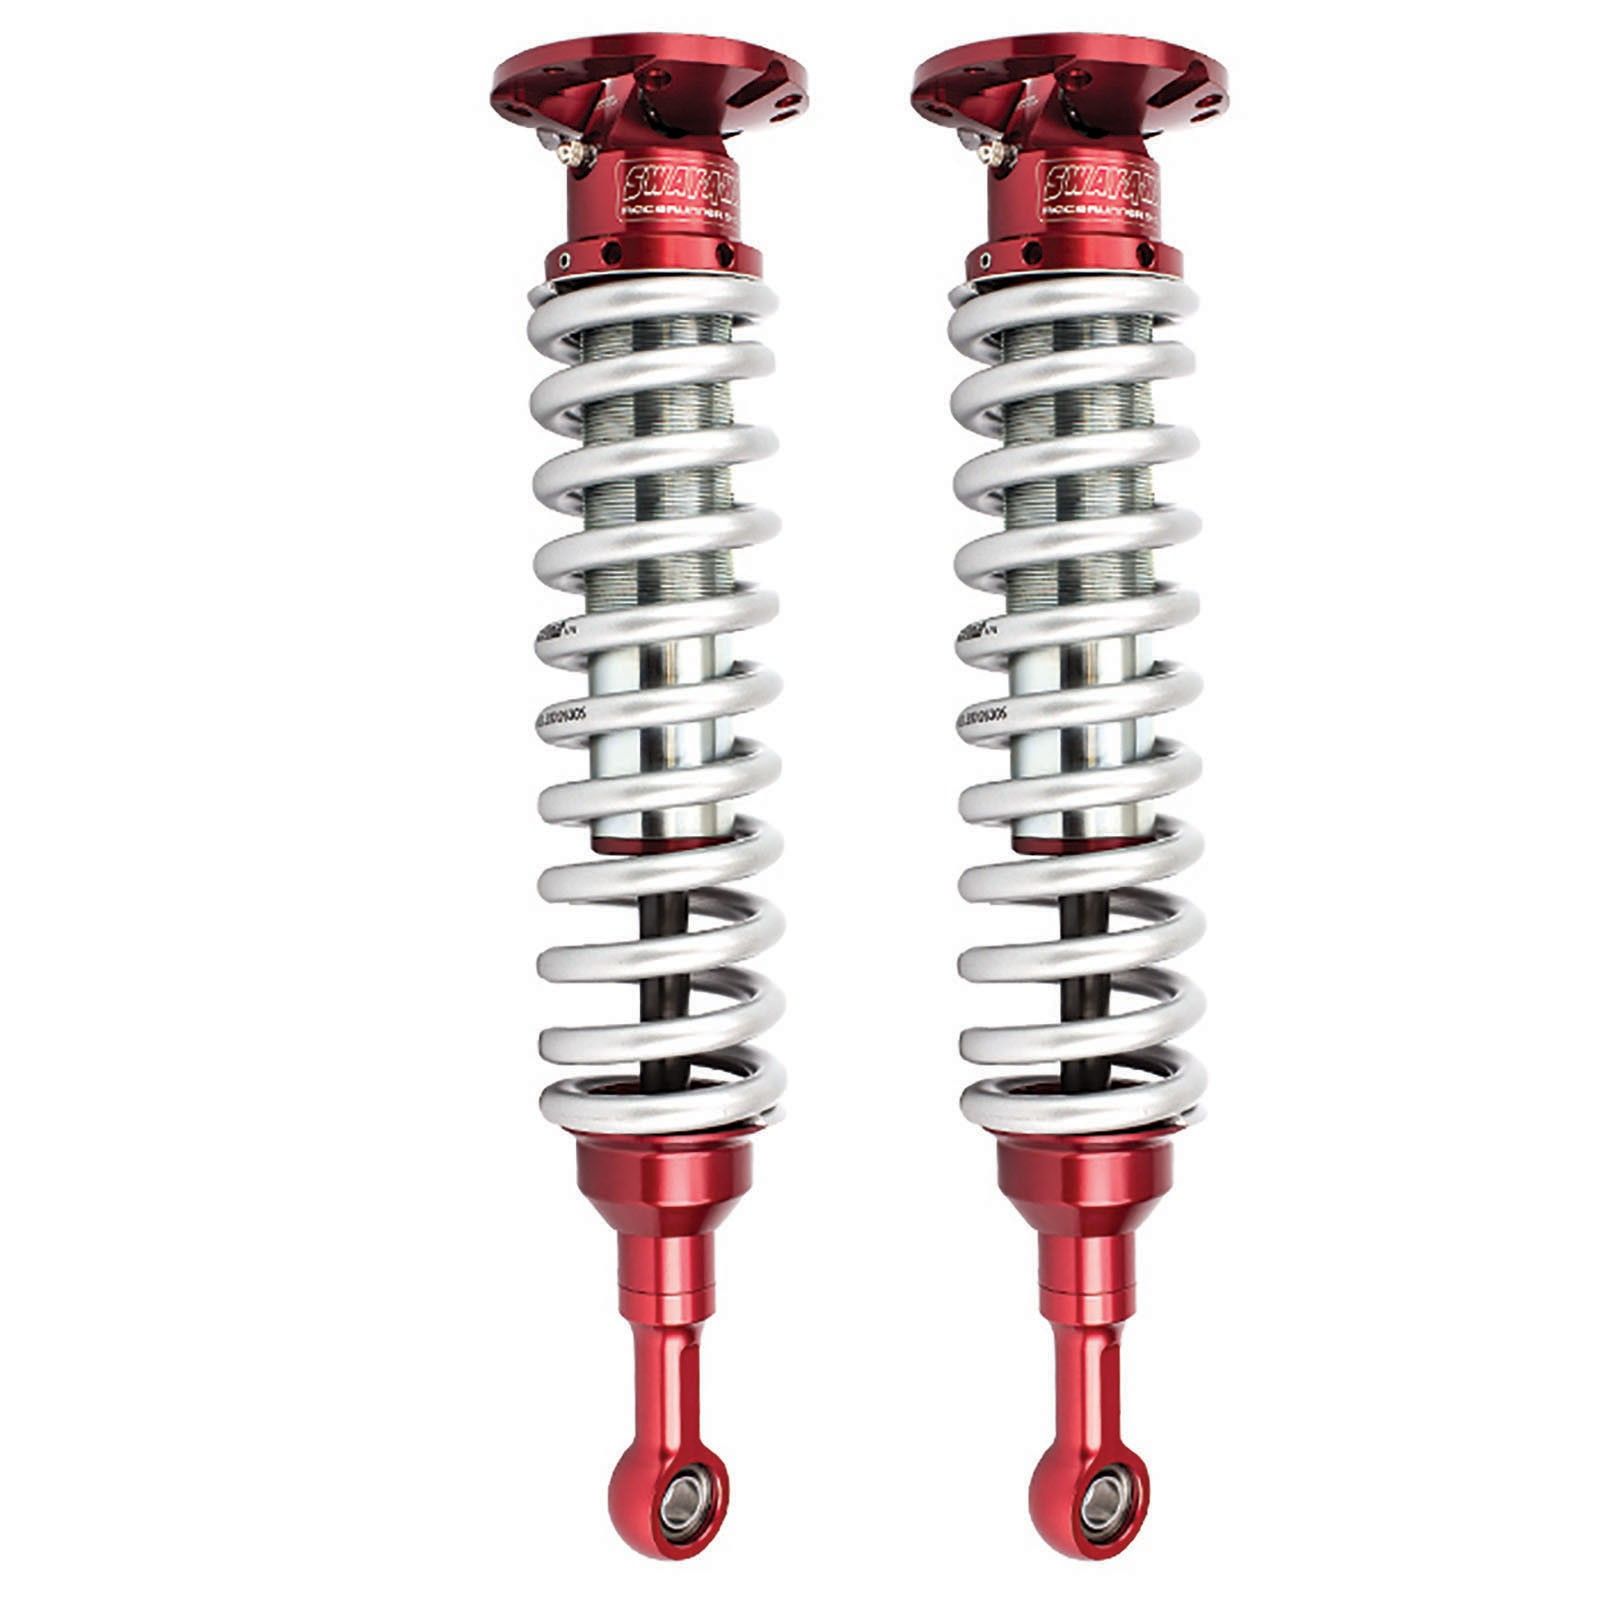 2007-2017 Toyota Tundra V8 4.6L/V8 5.7L aFe Control Sway-A-Way 2.5" Front Coilover Kit - 101-5600-06